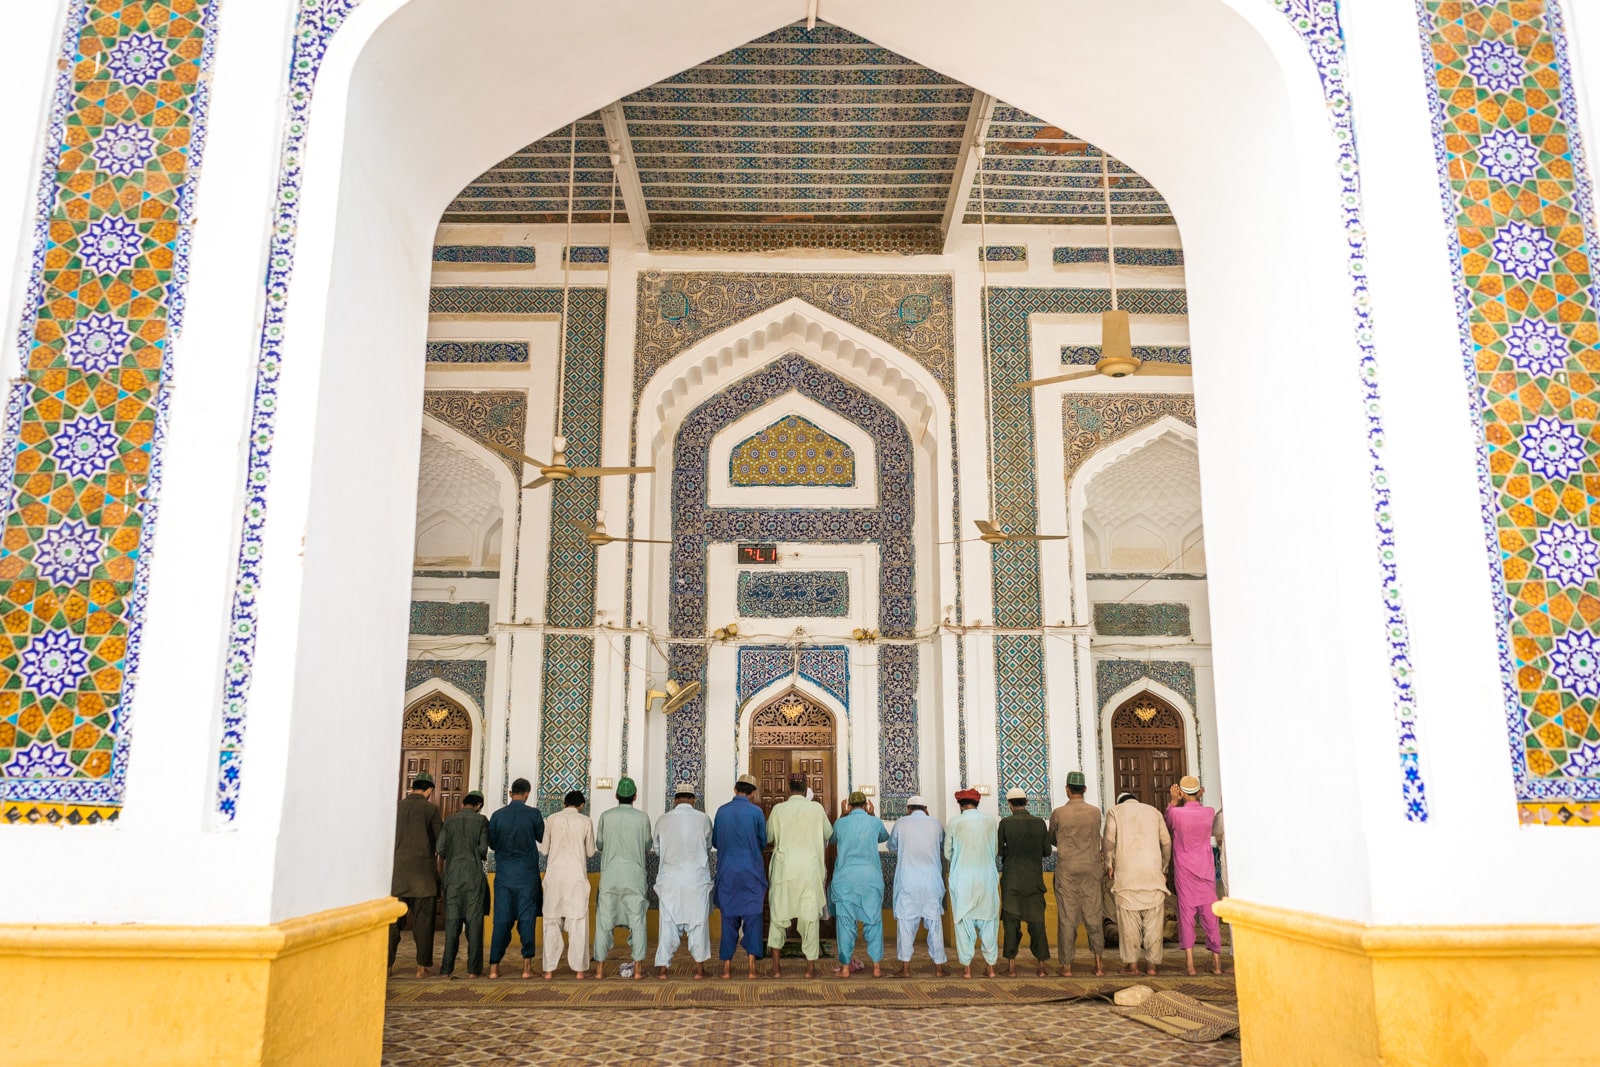 Sindh travel guide - Men praying at a shrine in Hala, Pakistan - Lost With Purpose travel blog